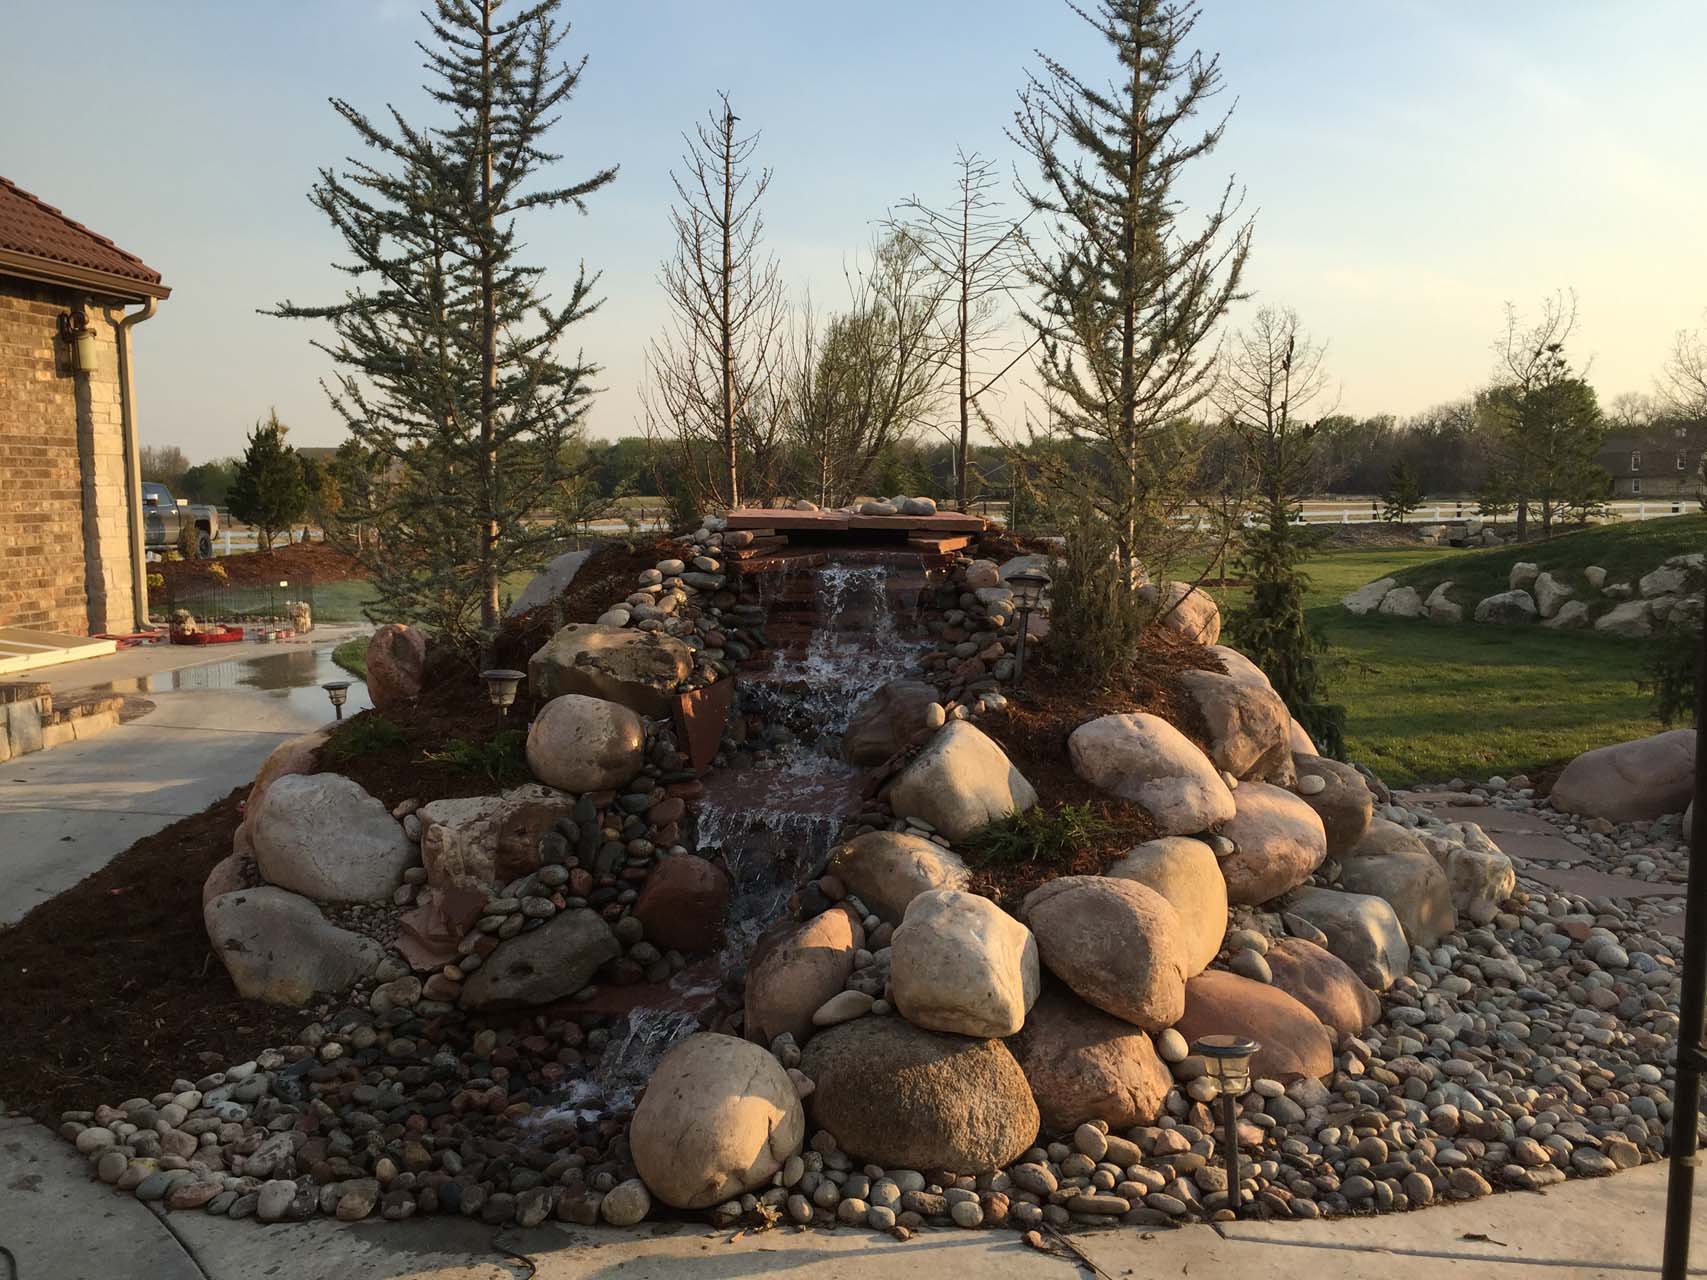 a large pile of rocks decorate an outdoor pond